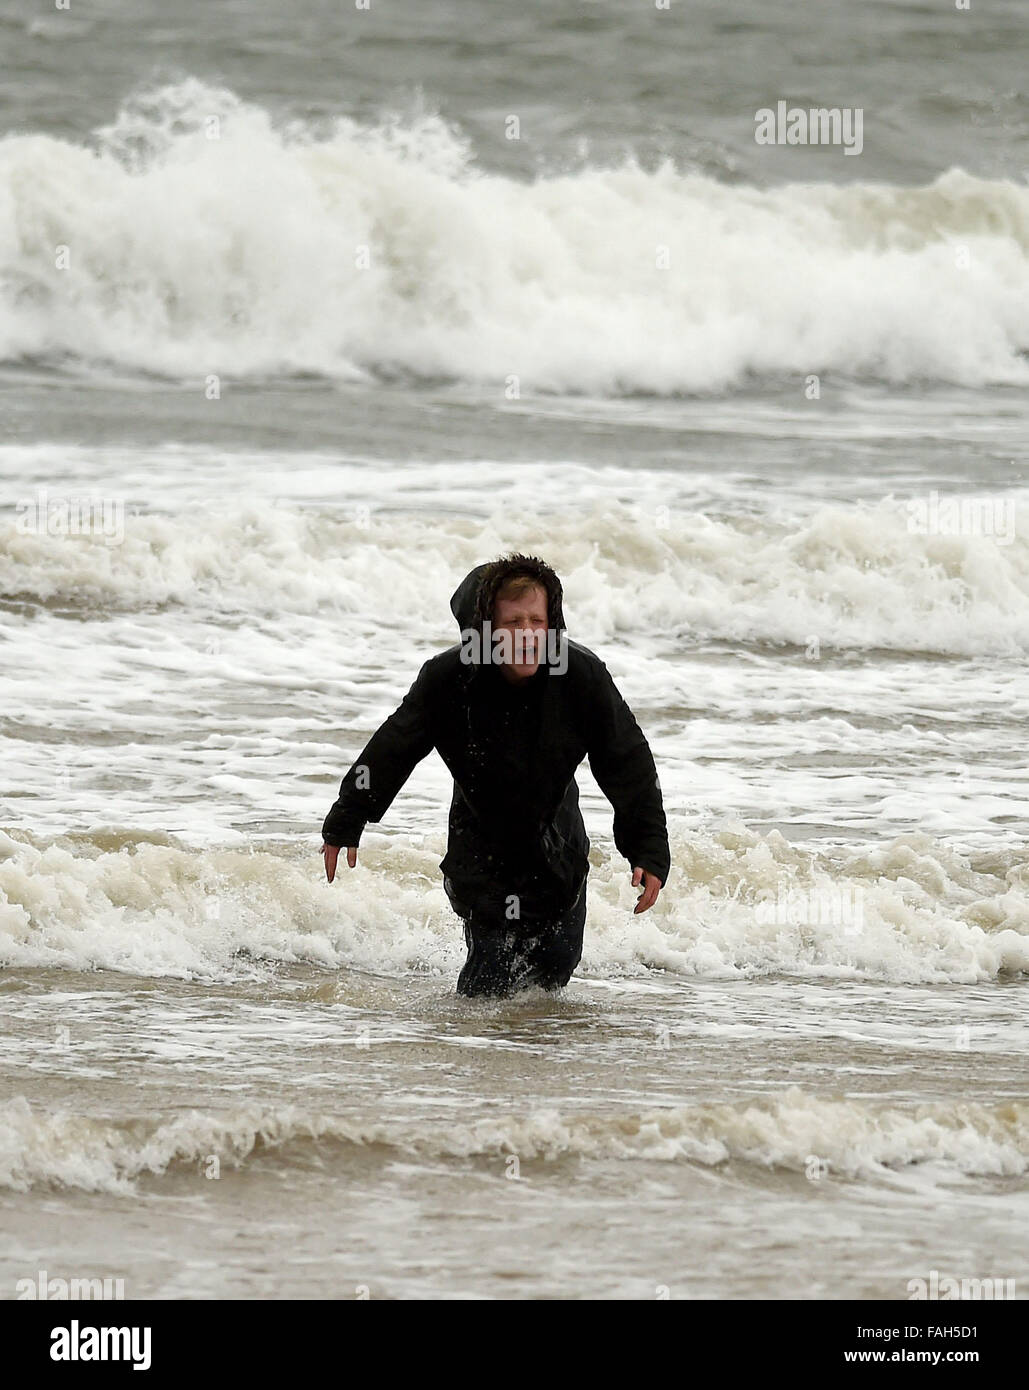 Boy in the sea fully clothed during stormy weather Stock Photo